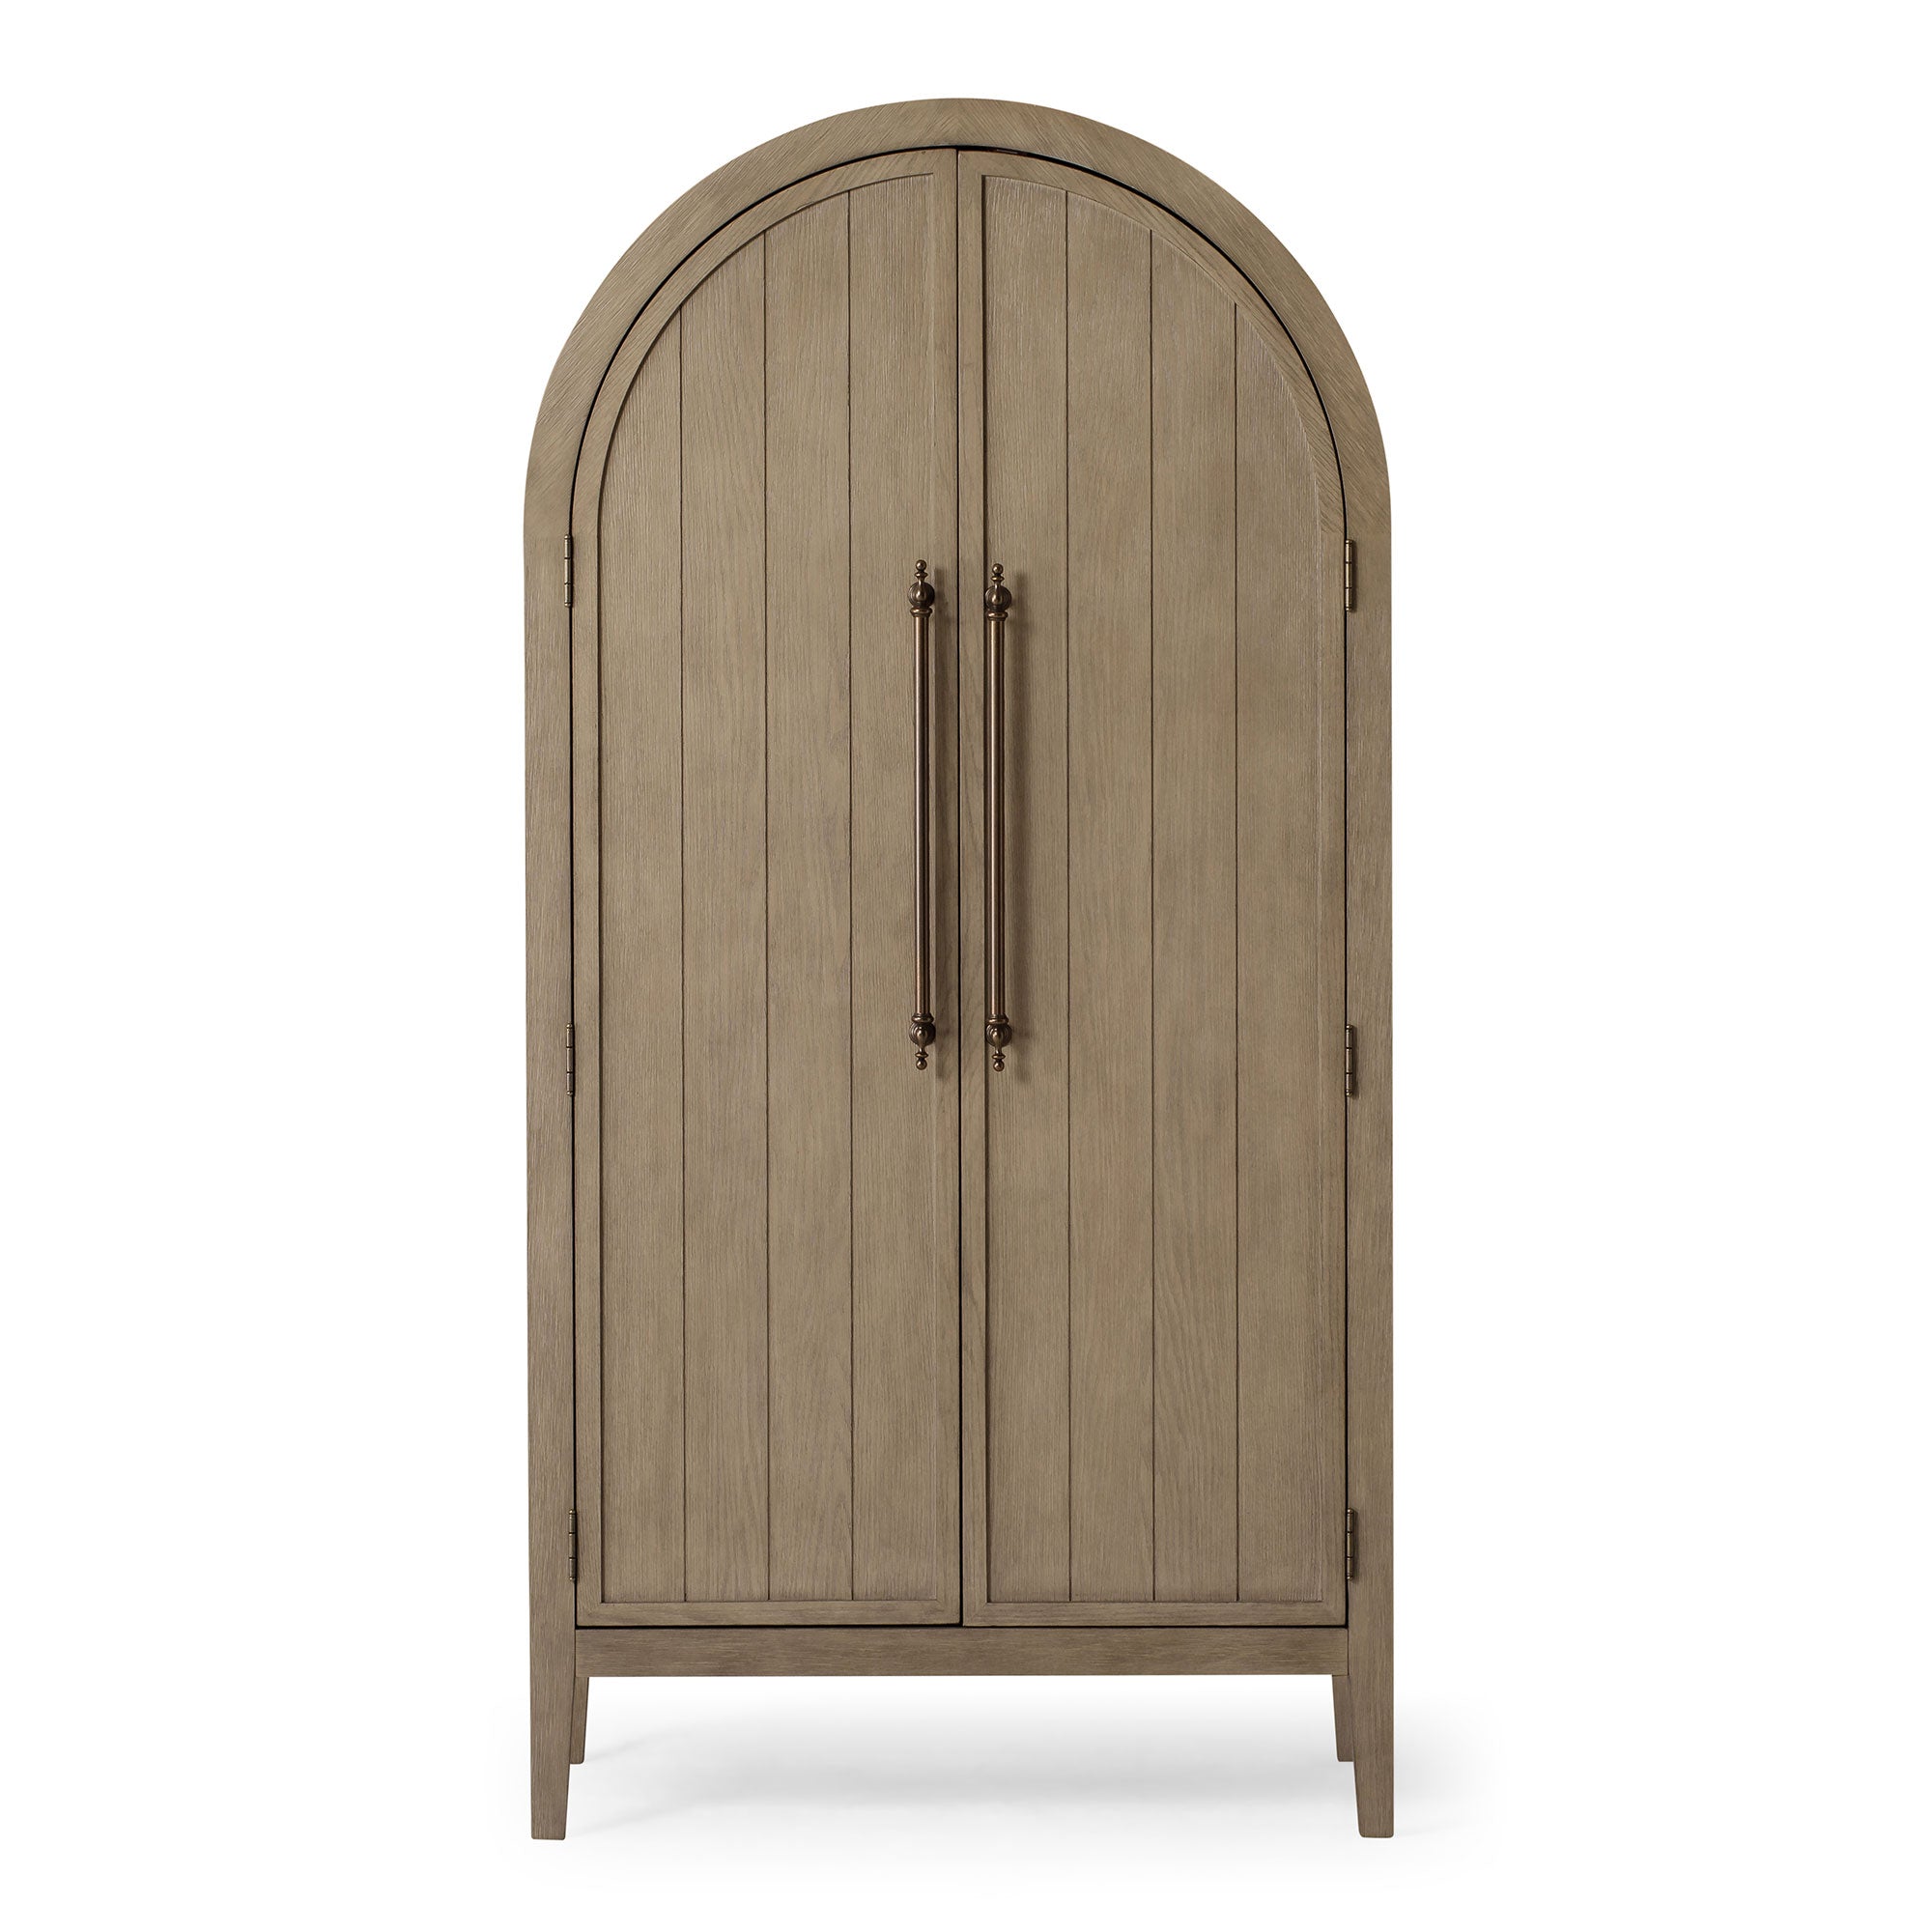 Selene Classical Wooden Cabinet in Antiqued Grey Finish in Cabinets by Maven Lane